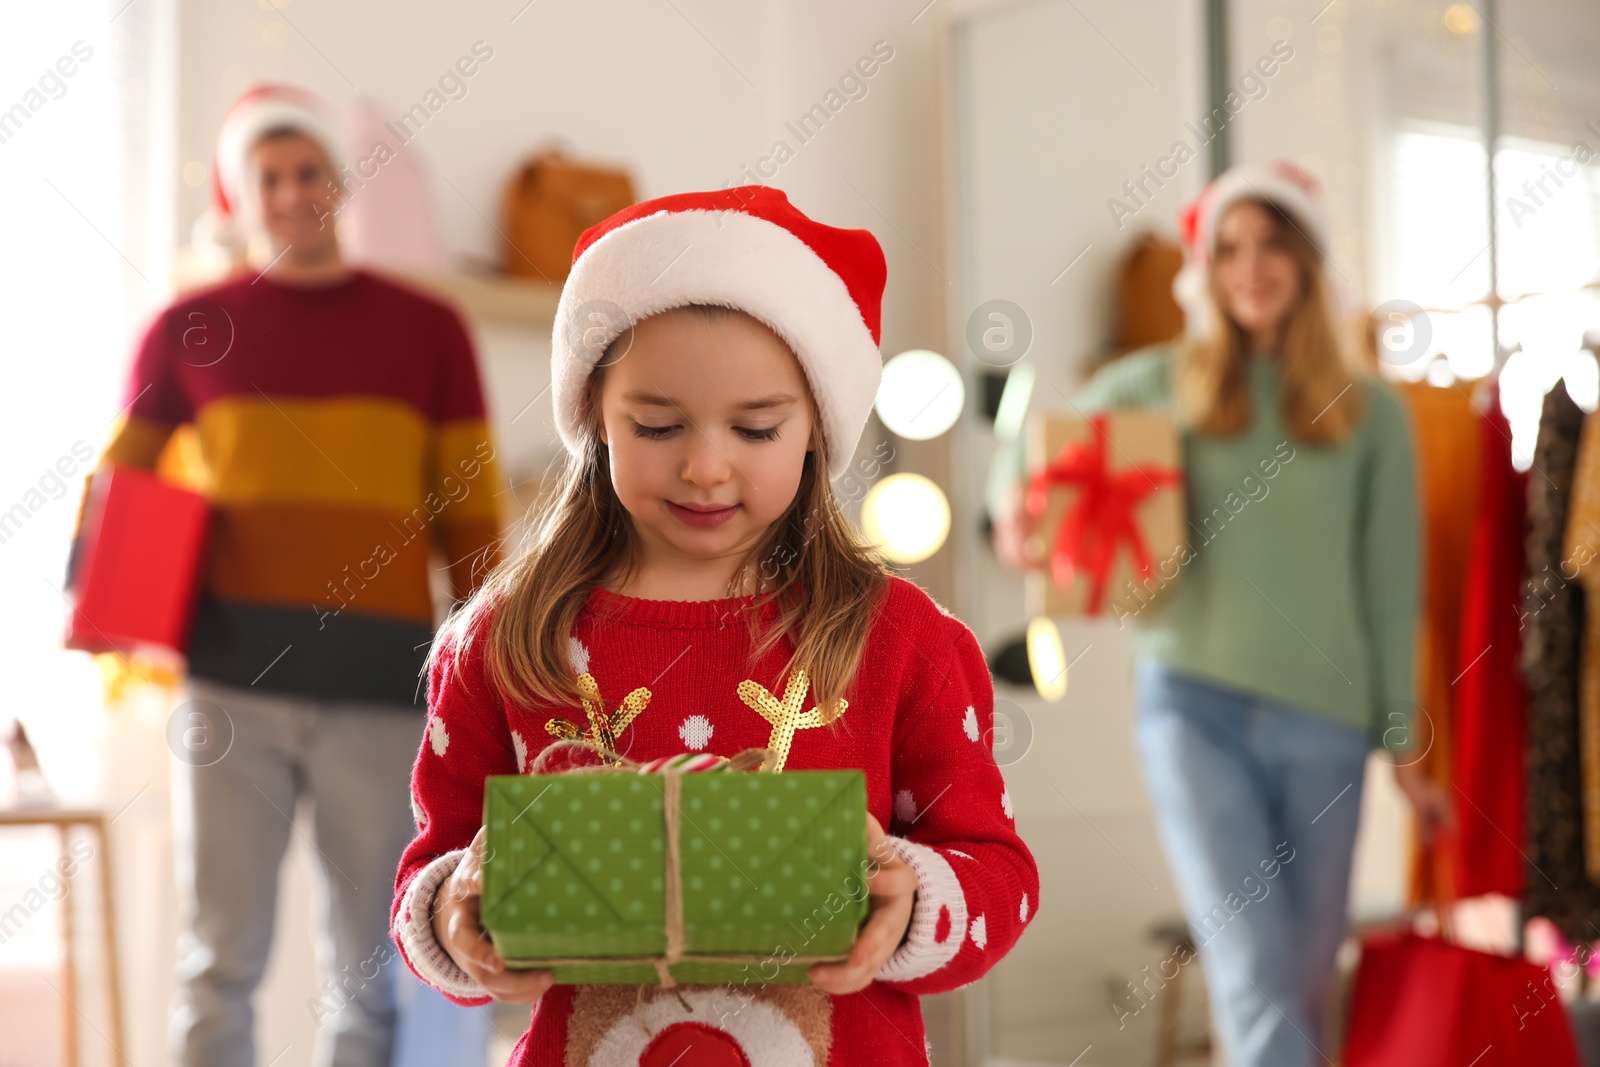 Photo of Little girl with gift box near her parents in store. Family Christmas shopping